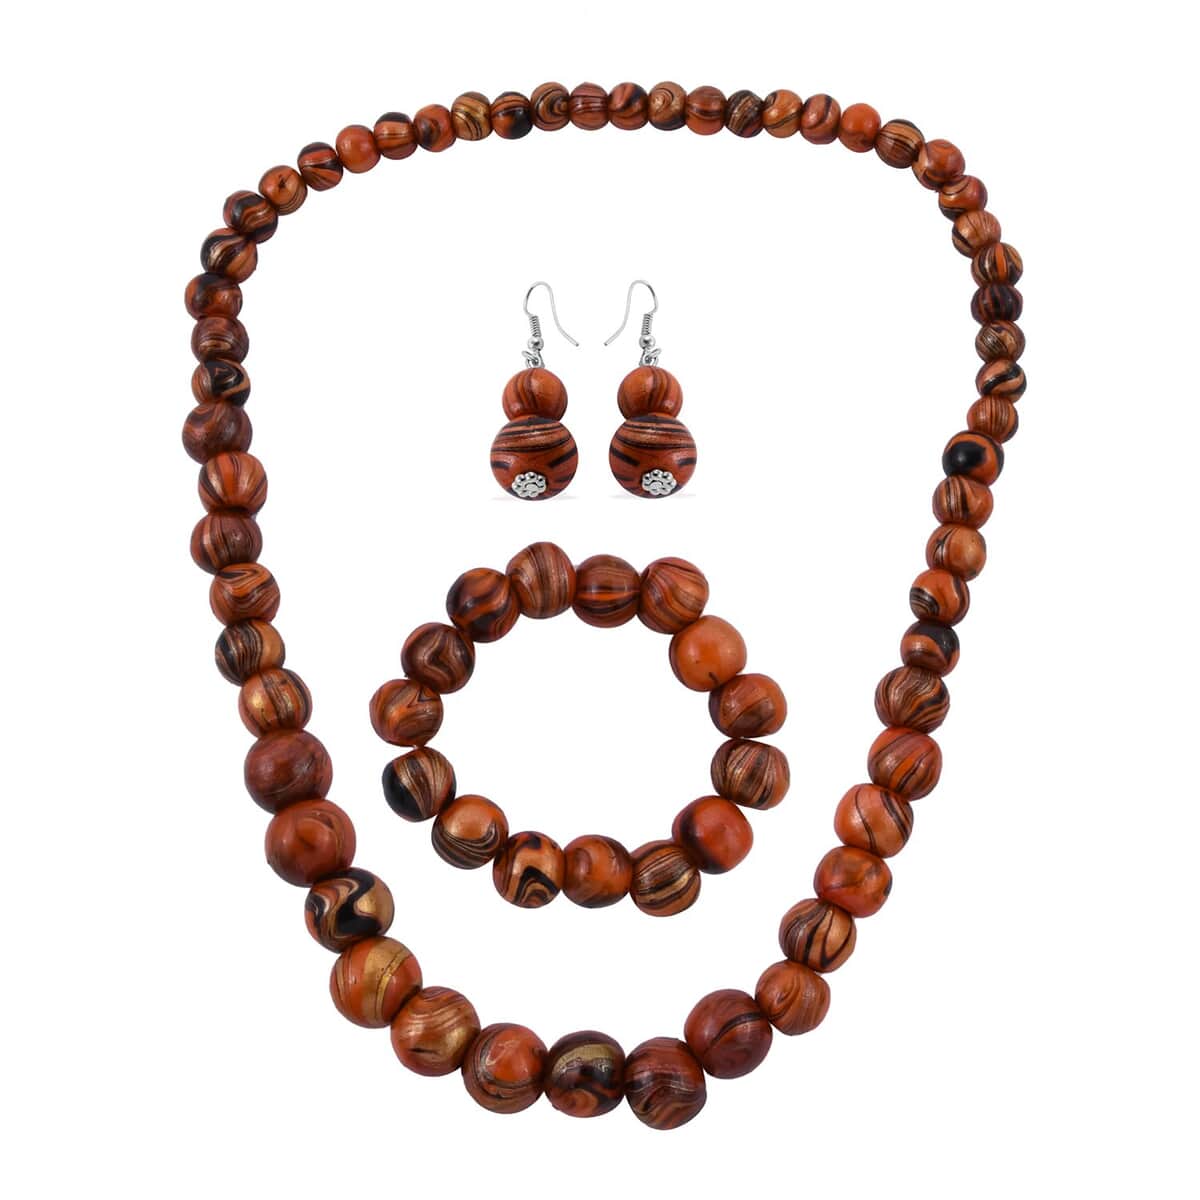 Orange Wooden Bead Necklace Stretch Bracelet Dangle Earrings in Silvertone, Bead Jewelry For Women 28 Inches image number 0